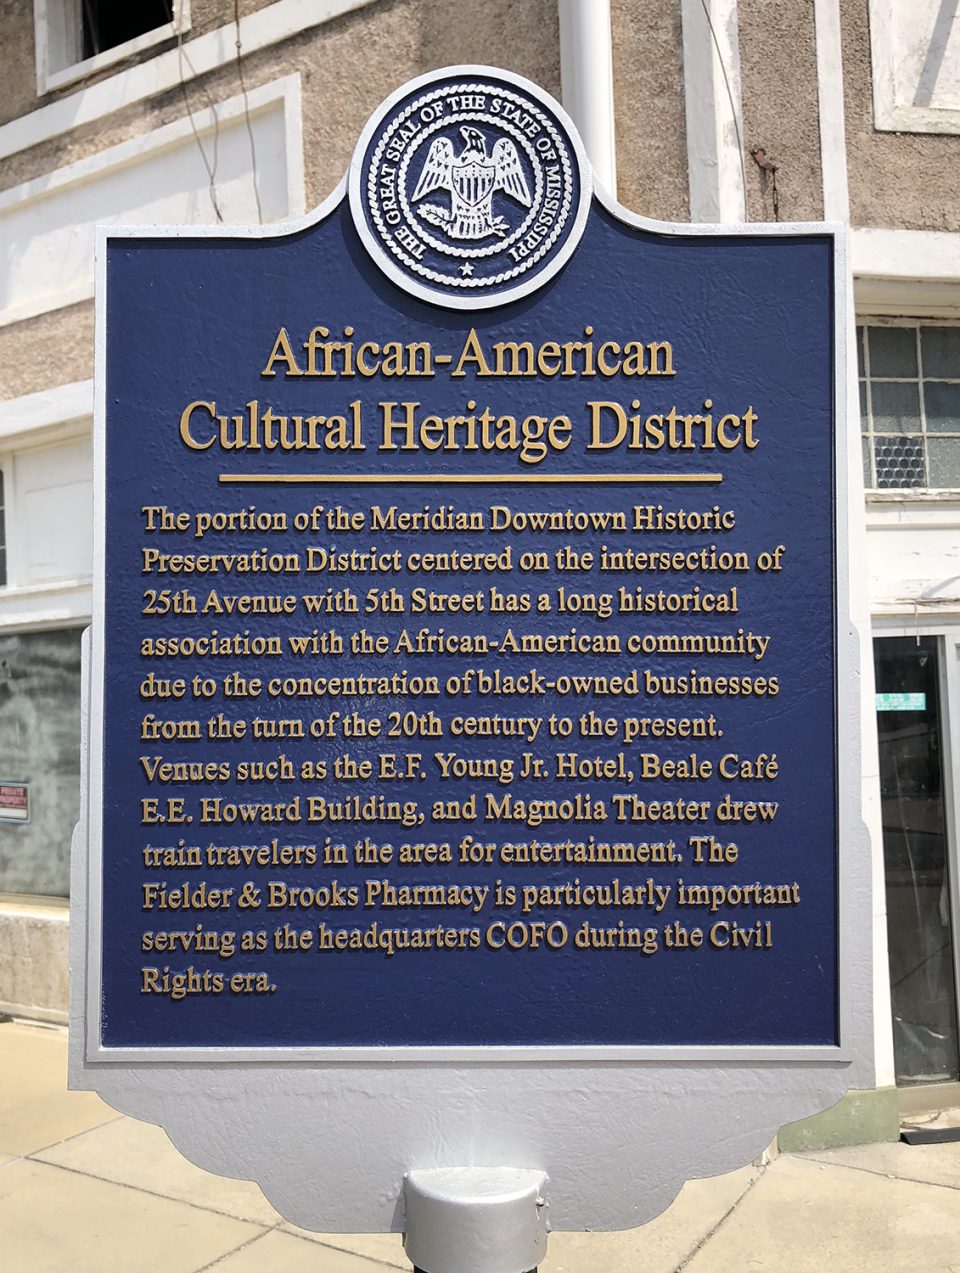 Historical marker in Meridian, Mississippi's African-American Cultural Heritage District, which includes the condemned E.F. Young Jr. Hotel.